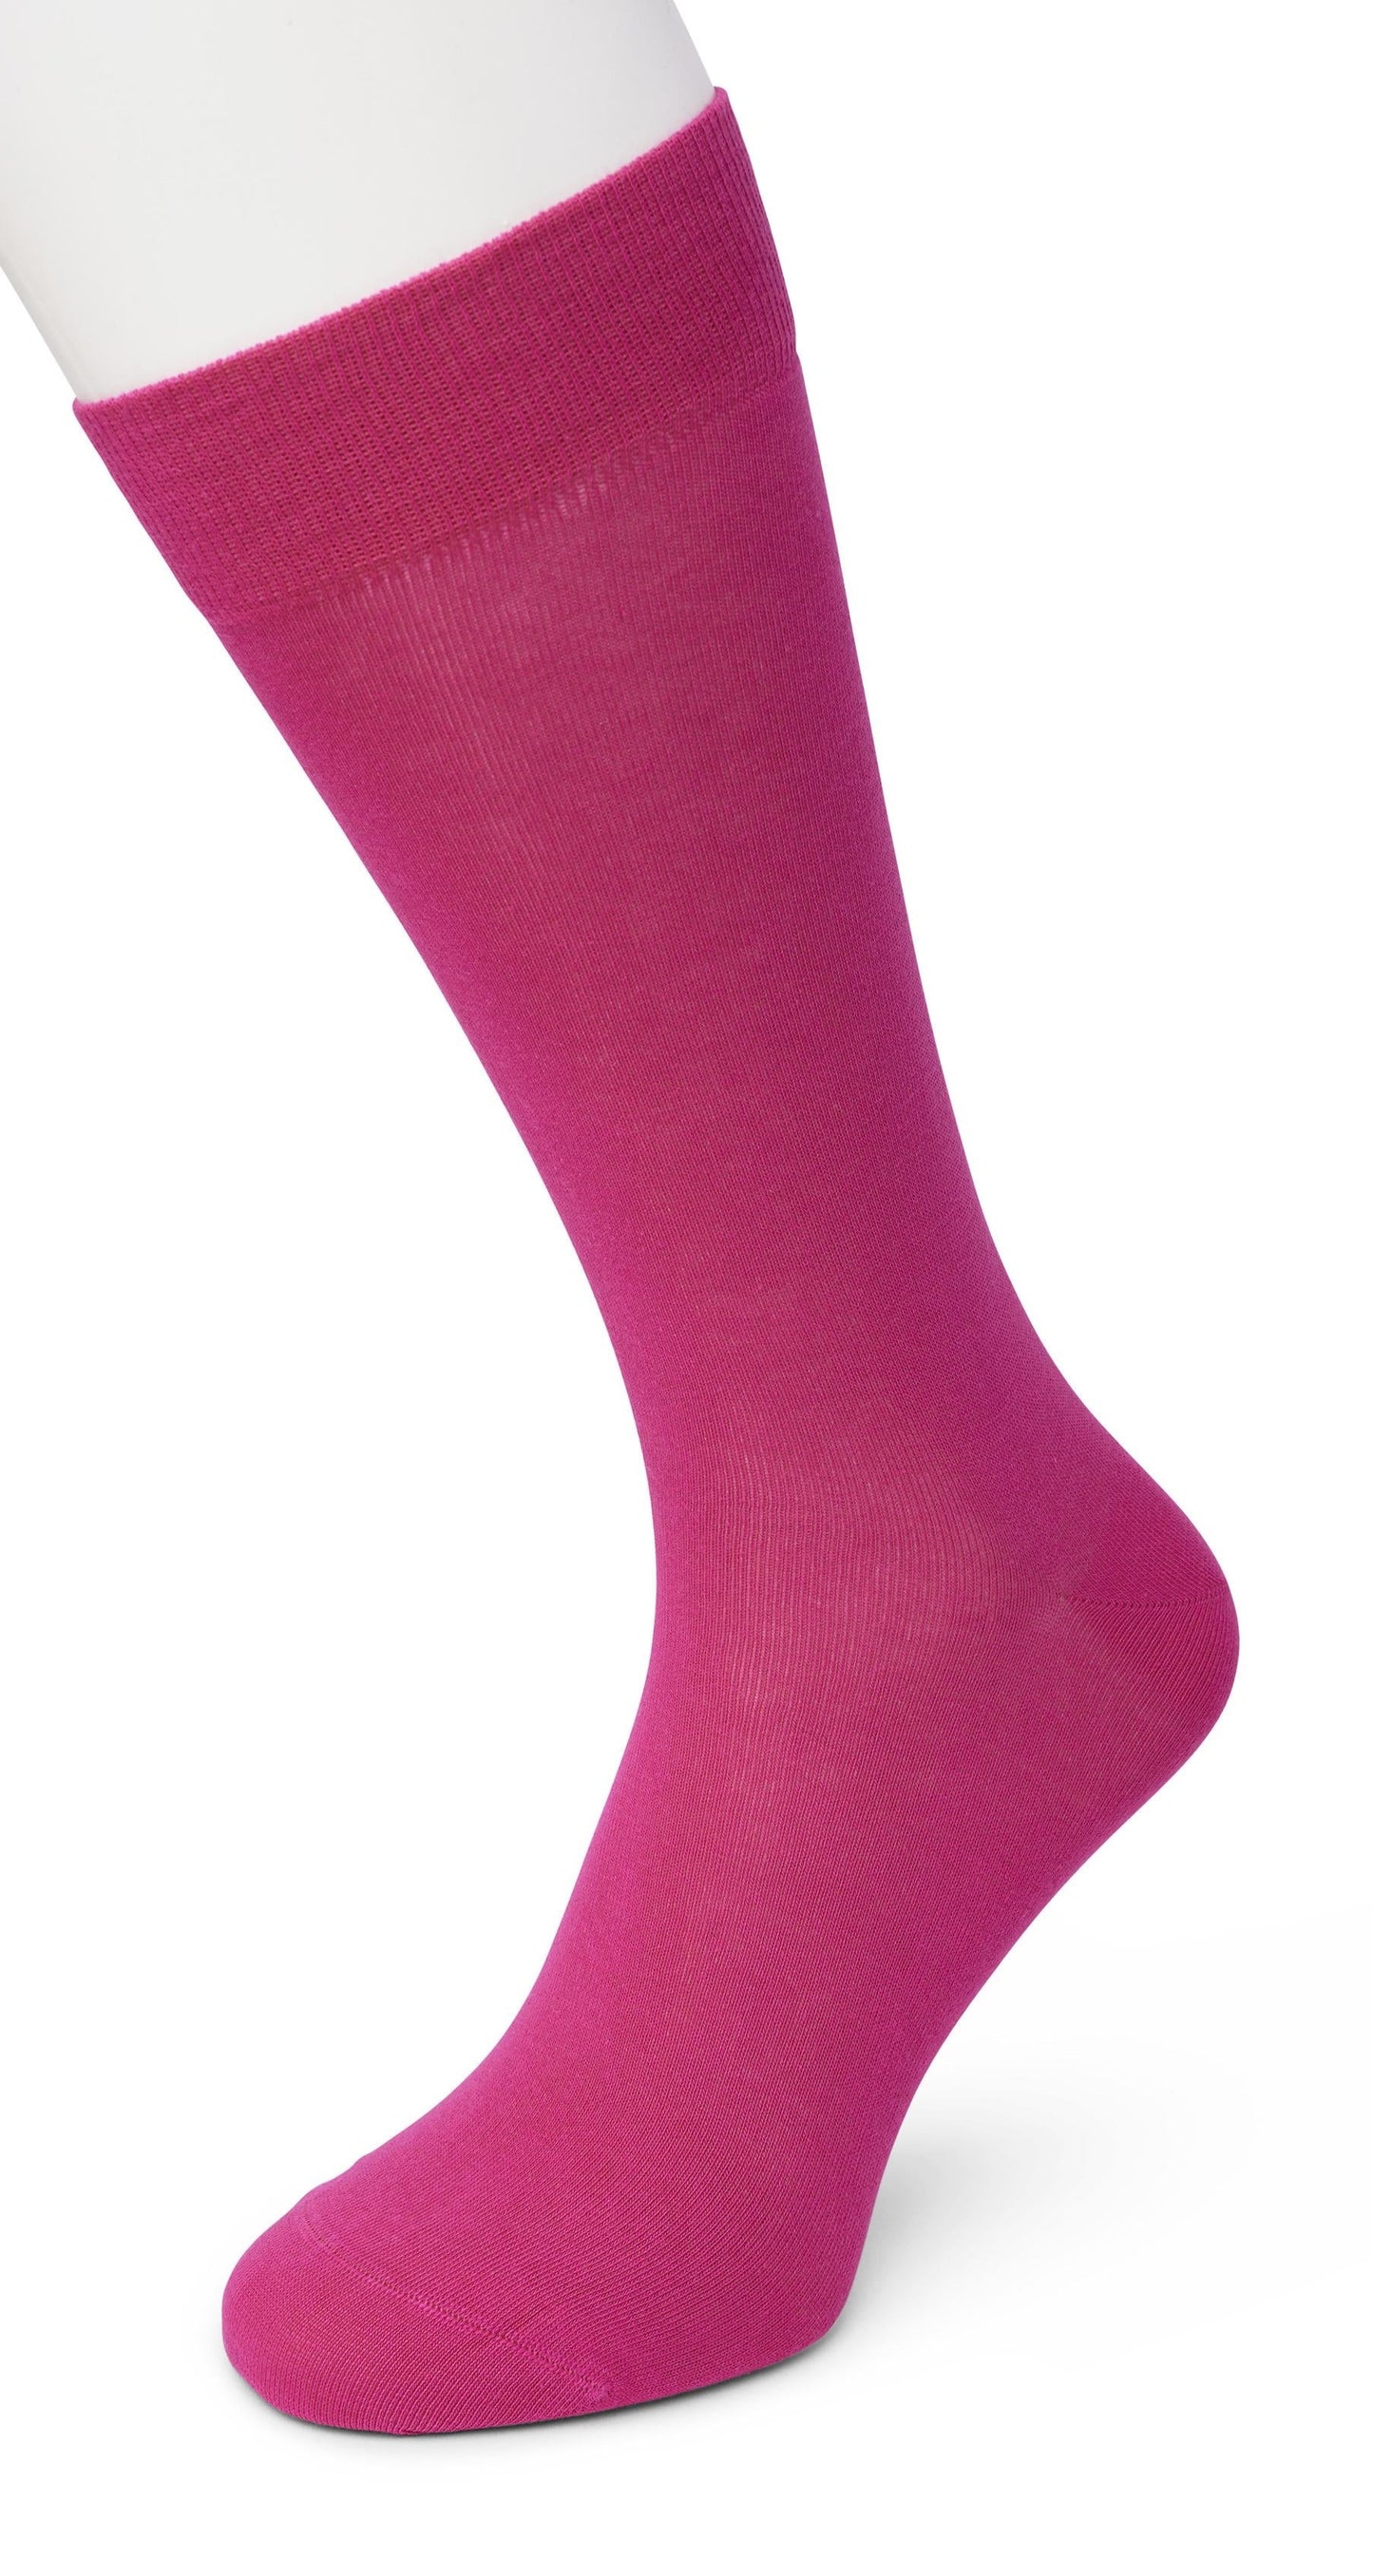 Bonnie Doon 83422 / BD632401 Cotton Sock -  Fucshia pink ankle socks available in men and women sizes